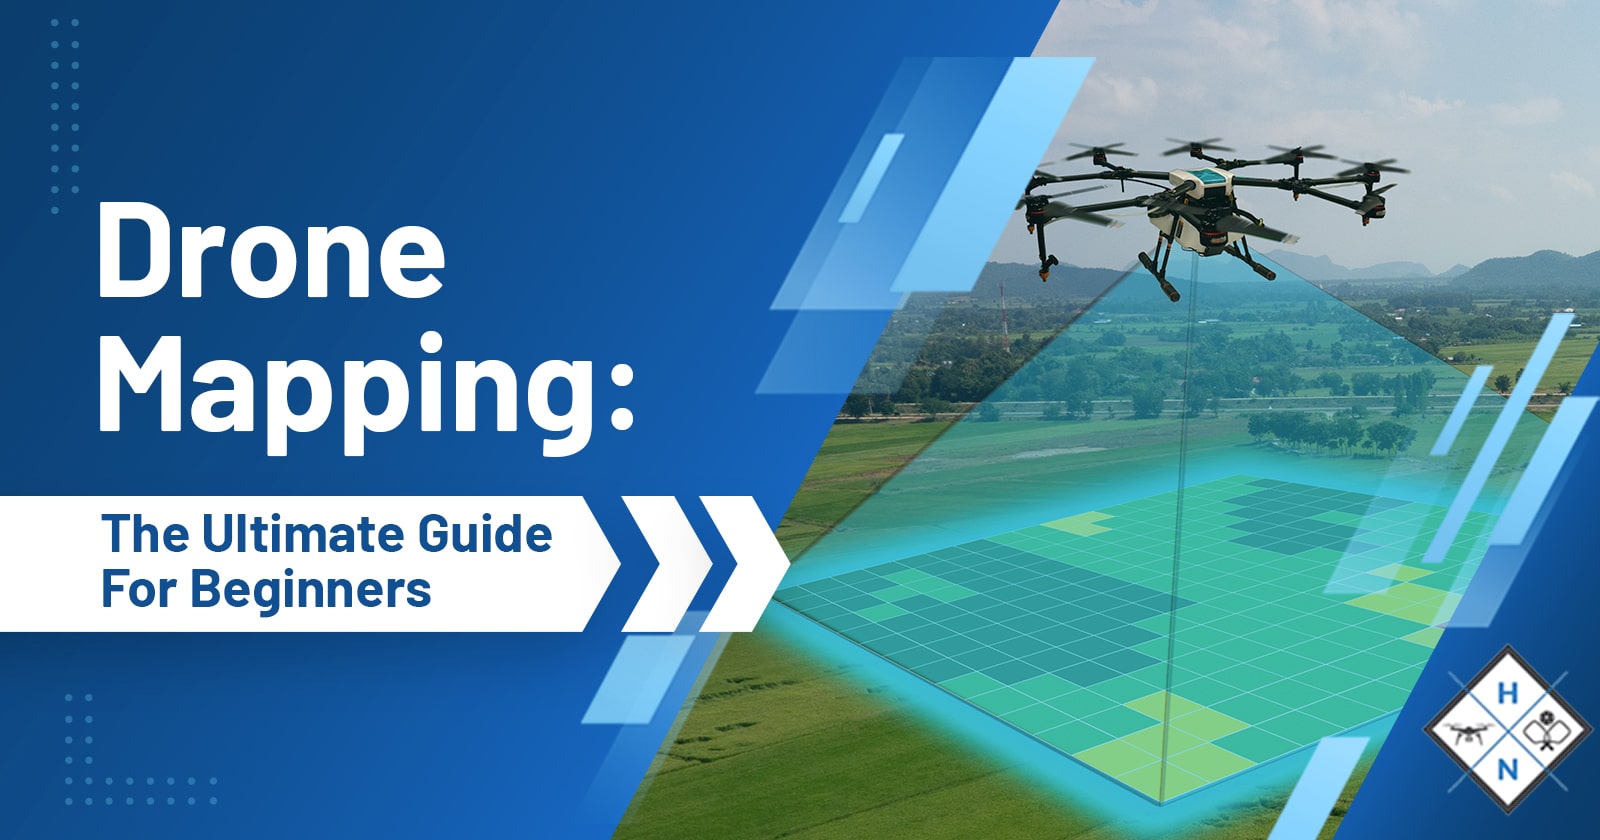 Drone Mapping: The Ultimate Guide For Beginners